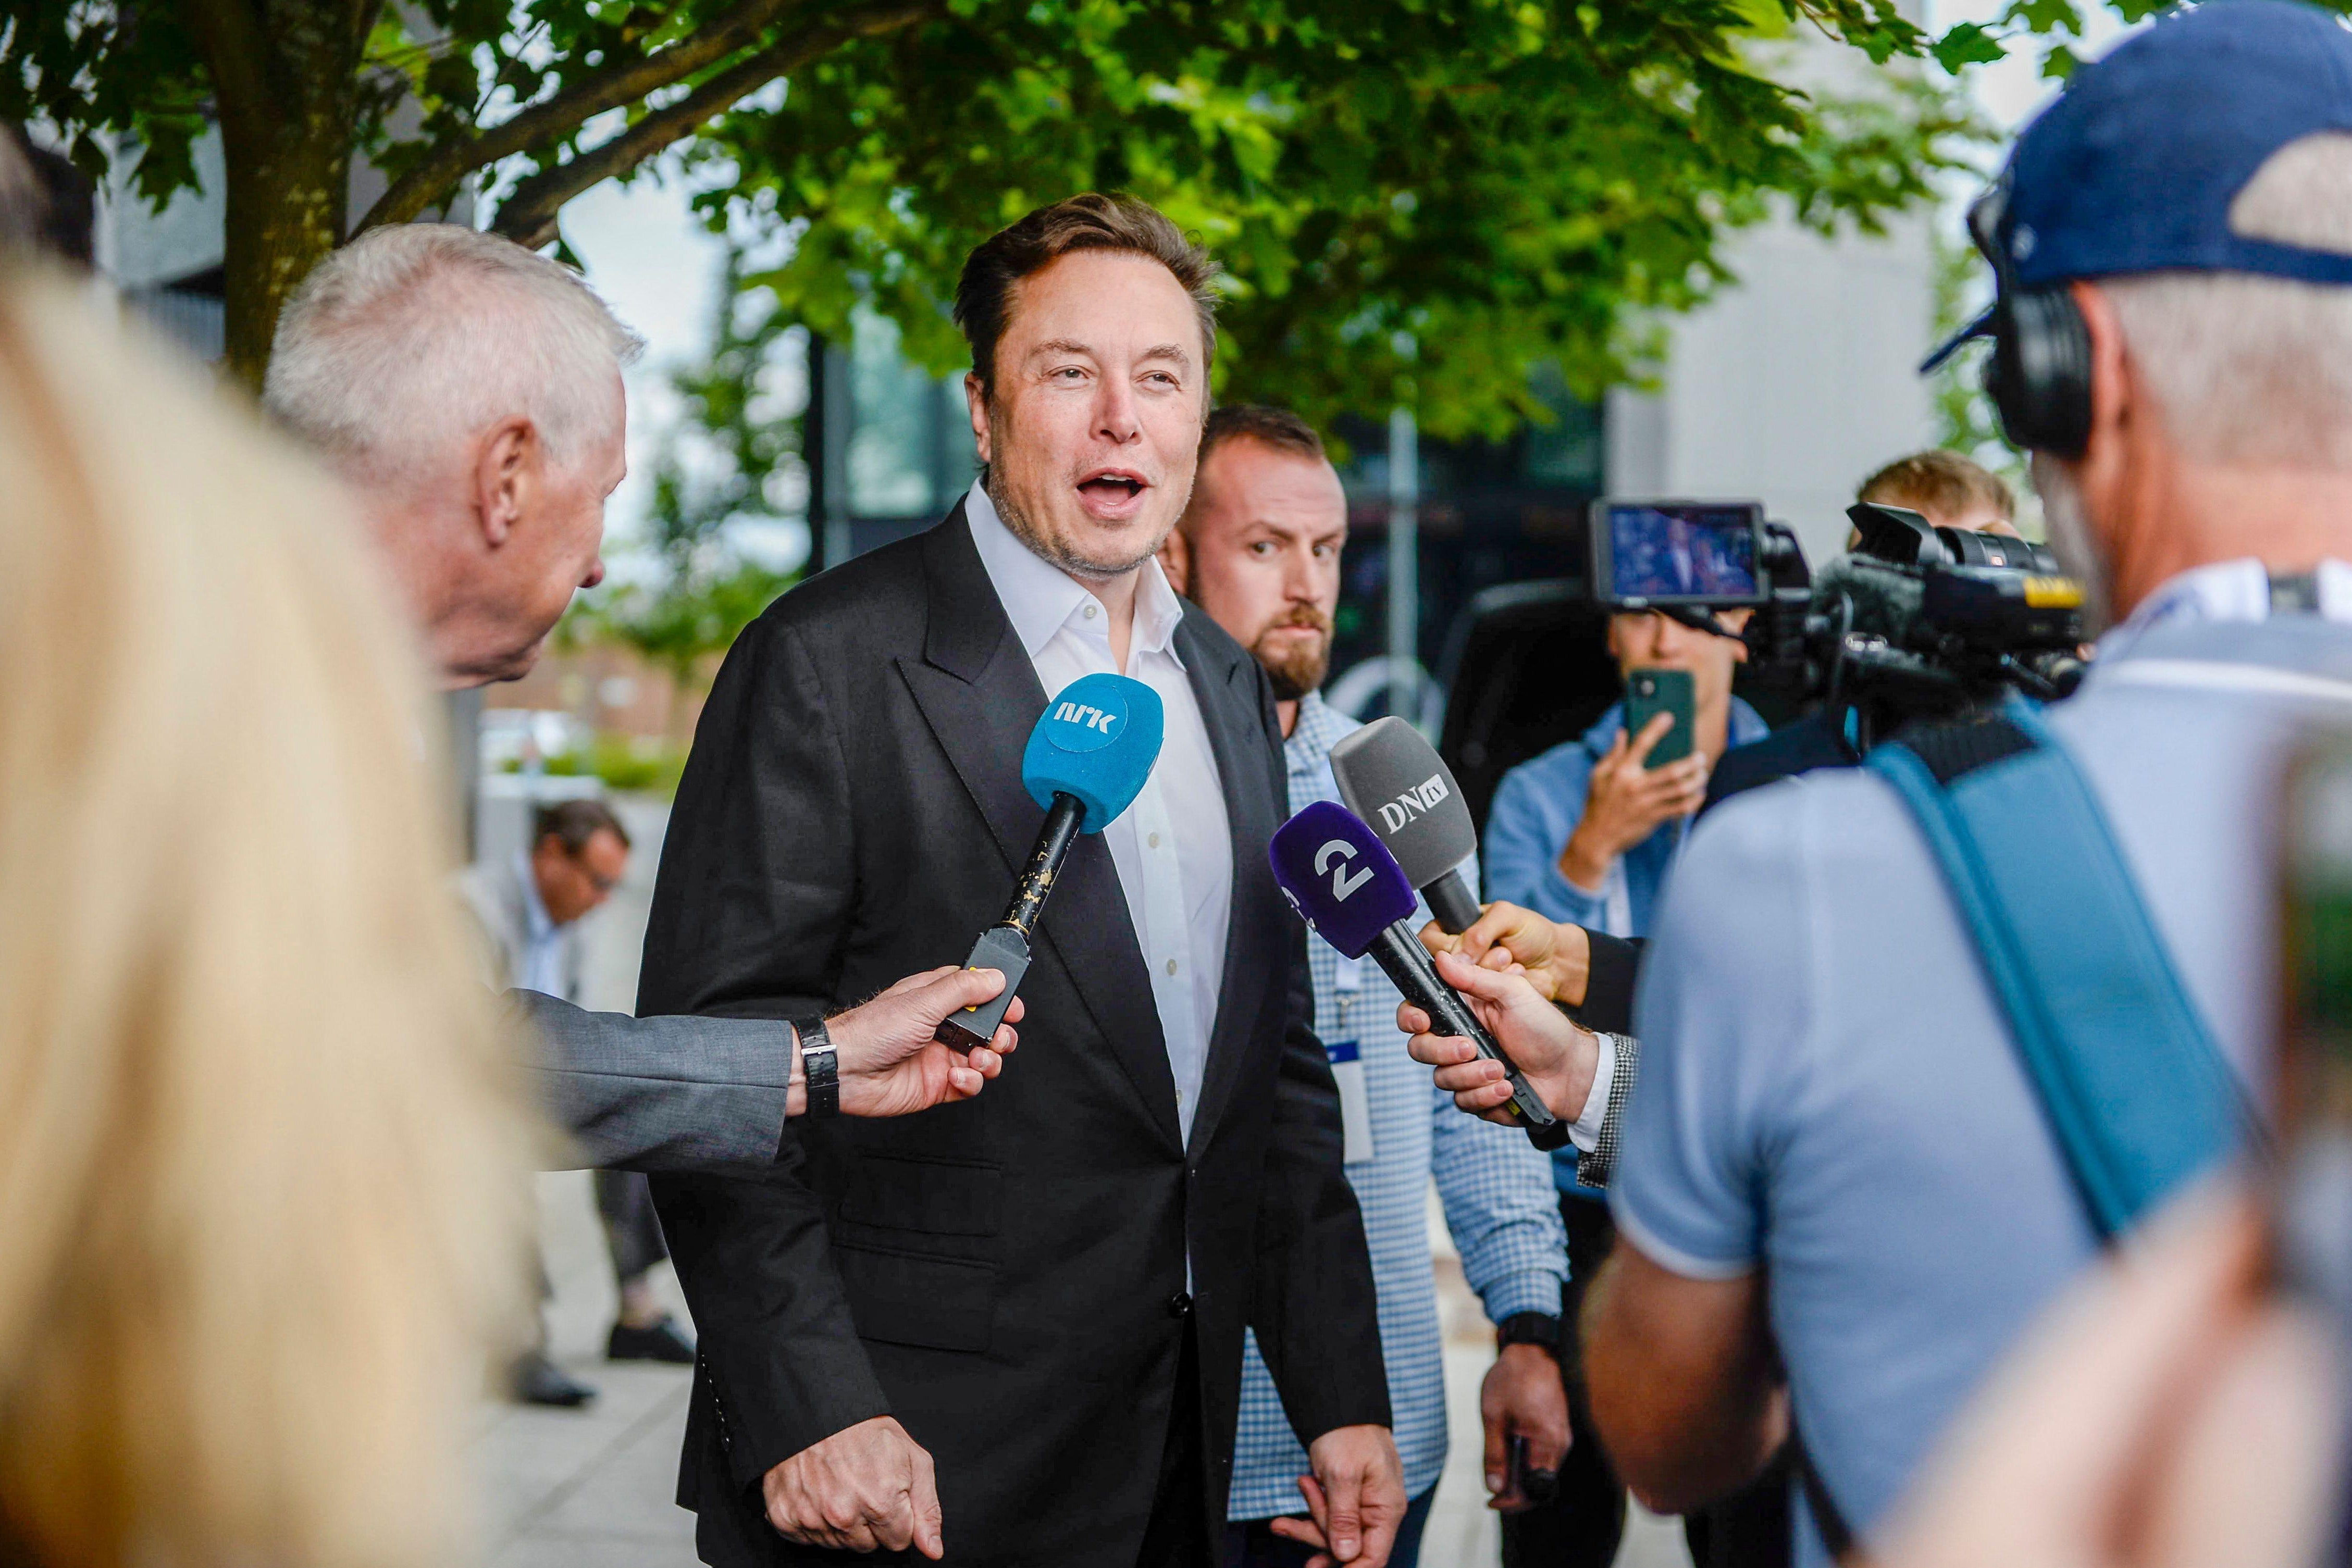 Tesla CEO Elon Musk gives interviews as he arrives at the Offshore Northern Seas 2022 (ONS) meeting in Stavanger, Norway on August 29, 2022. - The meeting, held in Stavanger from August 29 to September 1, 2022, presents the latest developments in Norway and internationally related to the energy, oil and gas sector. - Norway OUT (Photo by Carina Johansen / NTB / AFP) / Norway OUT (Photo by CARINA JOHANSEN/NTB/AFP via Getty Images)